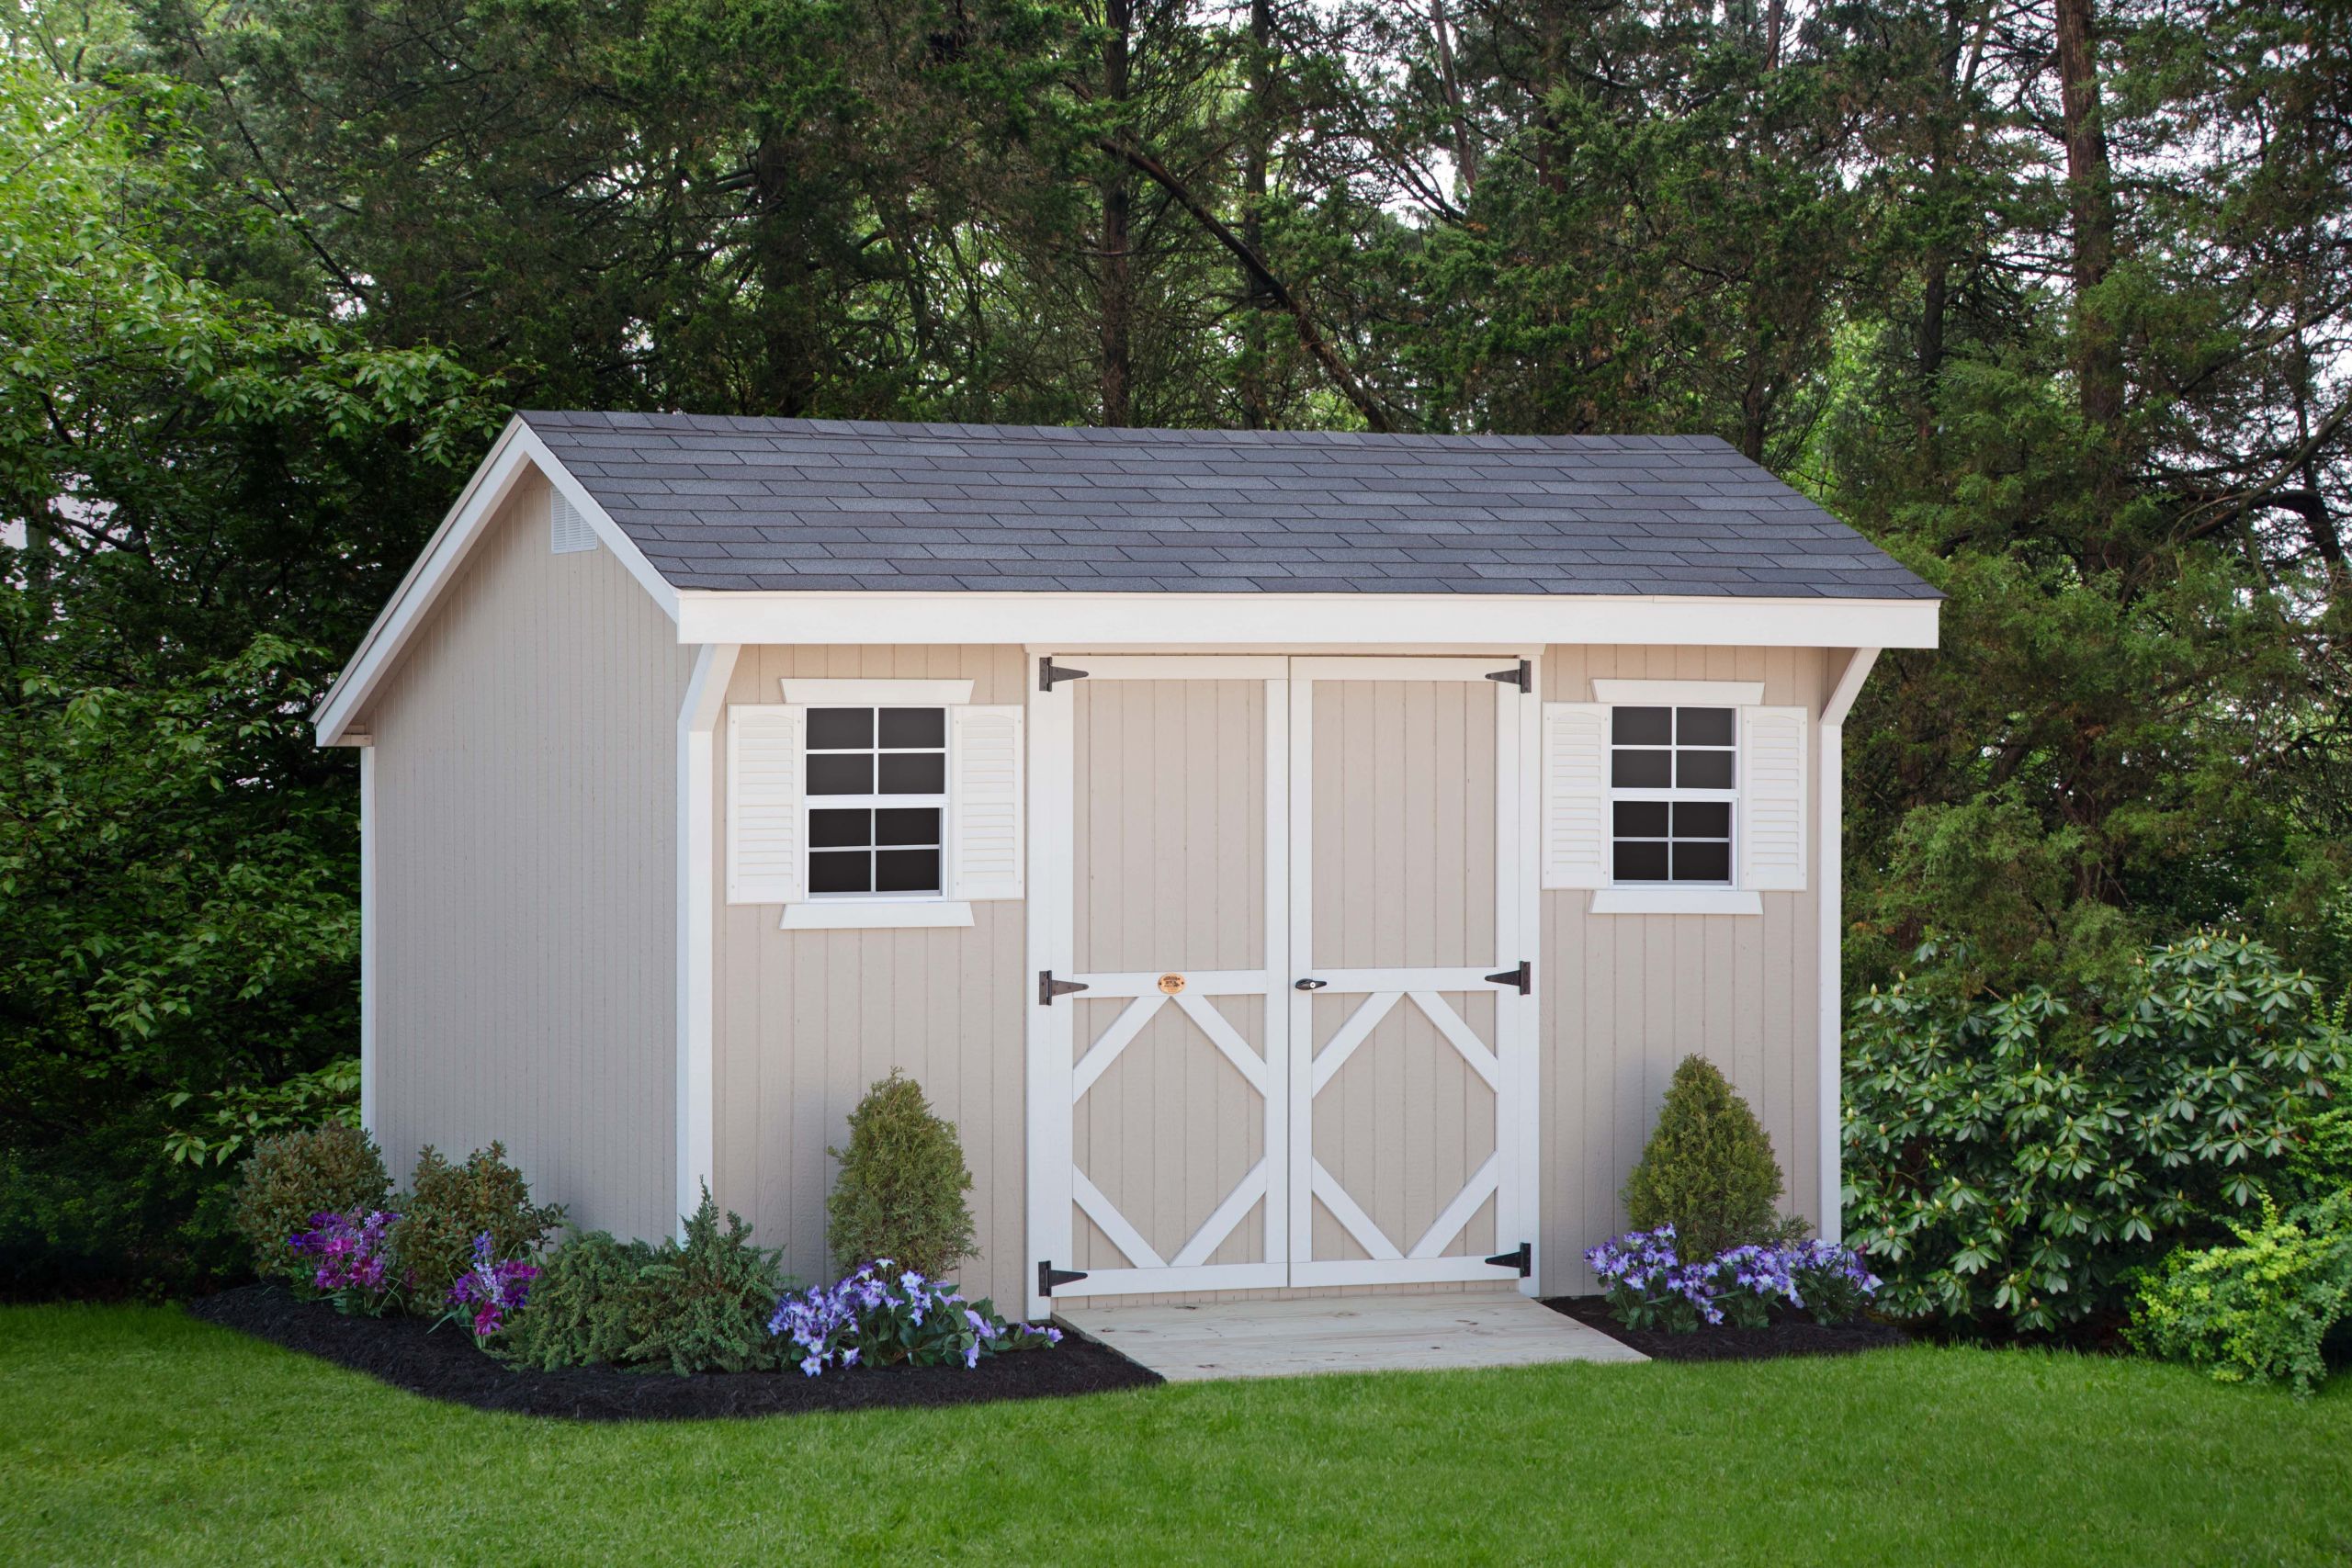 DIY Outdoor Storage Shed
 DIY Storage Shed panelized walls makes for an easy weekend